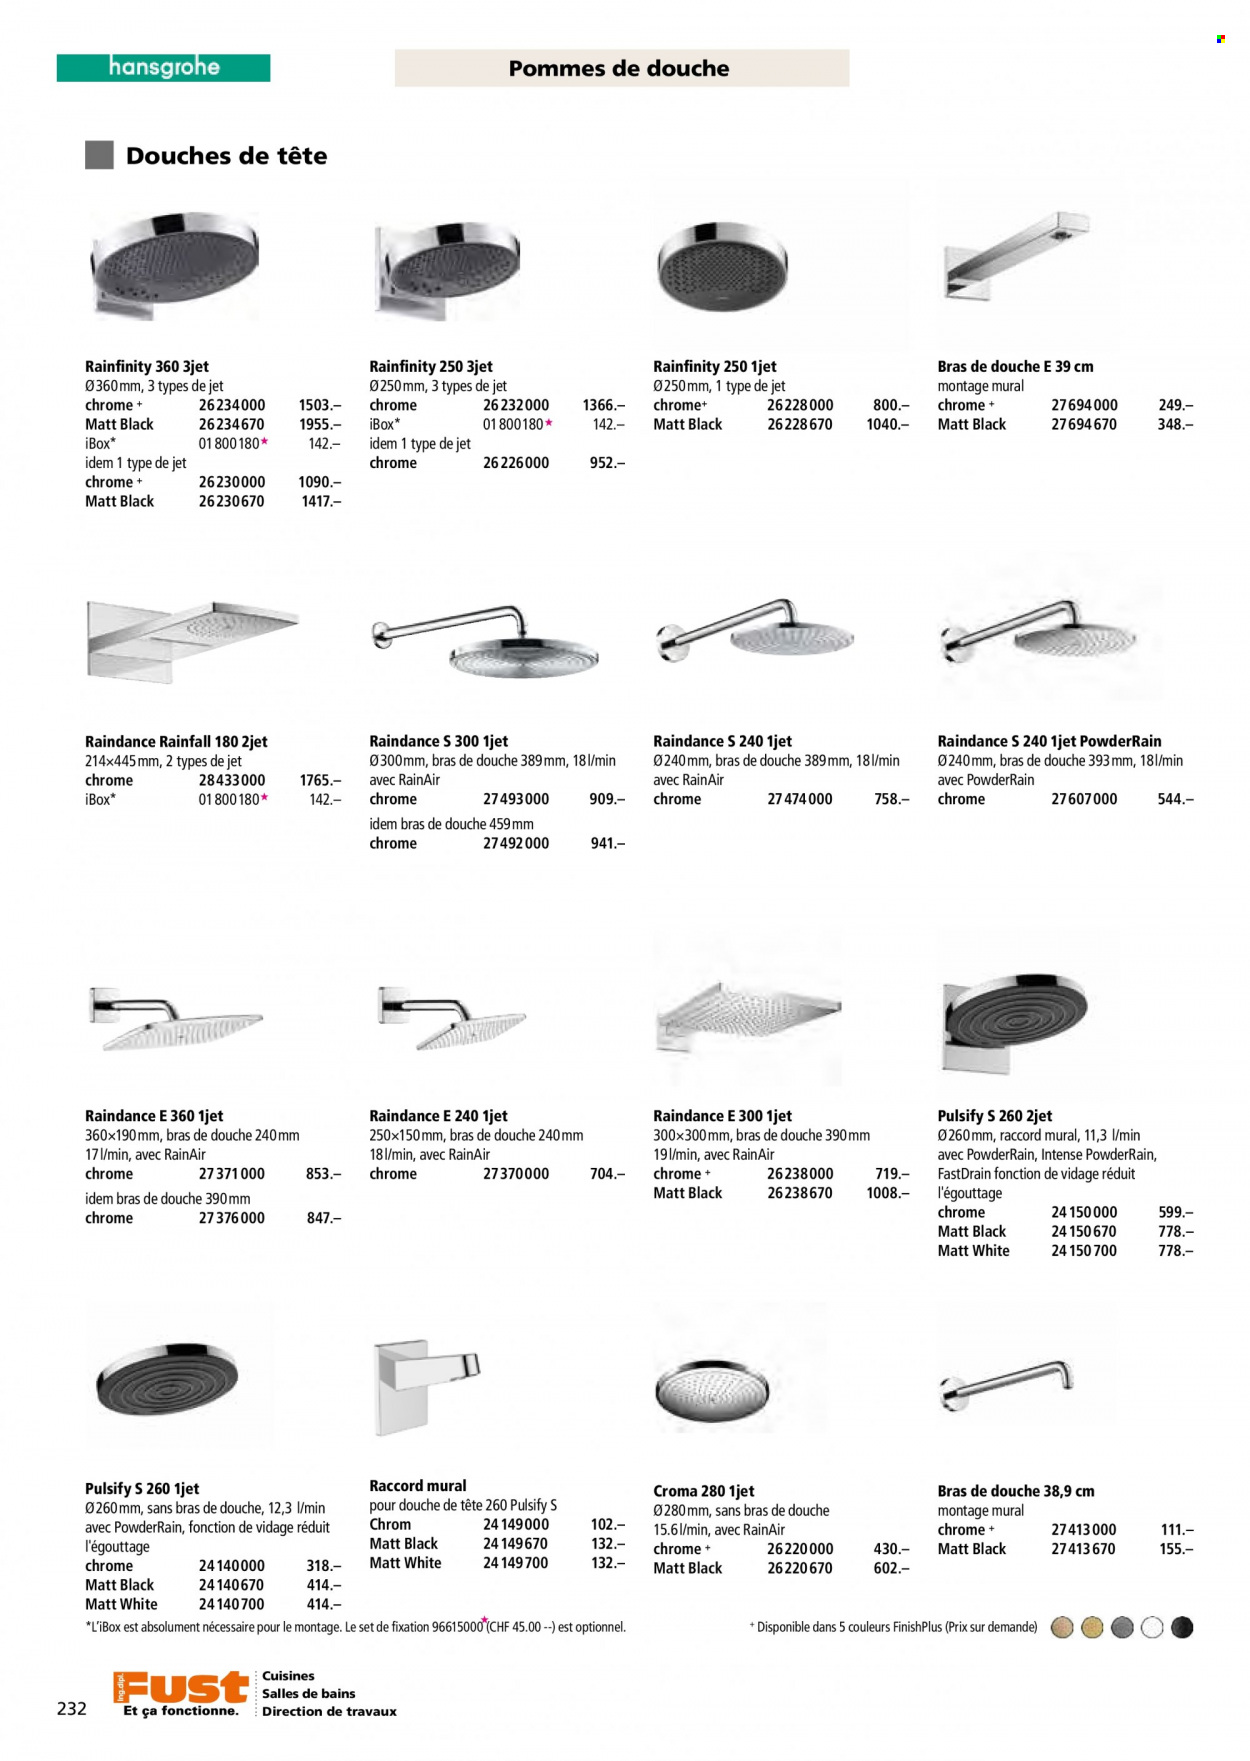 Catalogue Fust. Page 232.